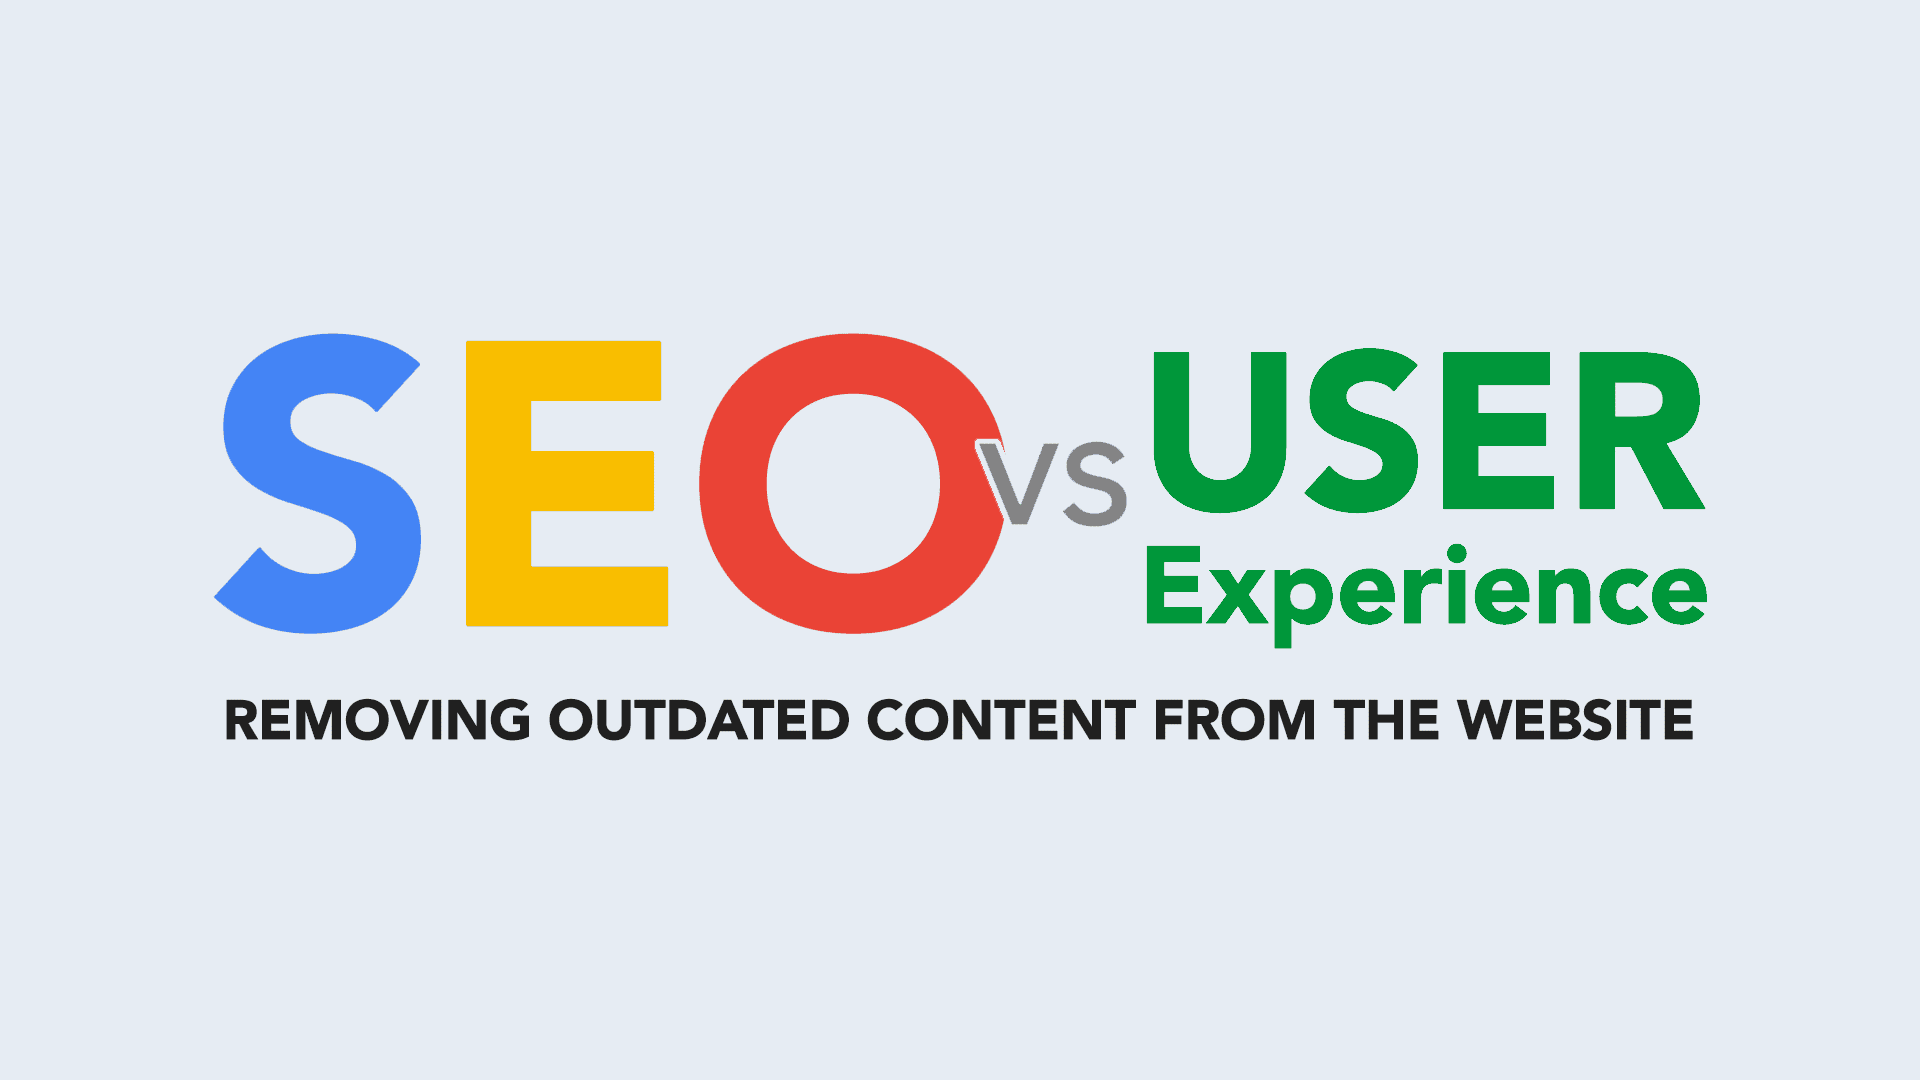 Removing outdated content from the website... not only for SEO